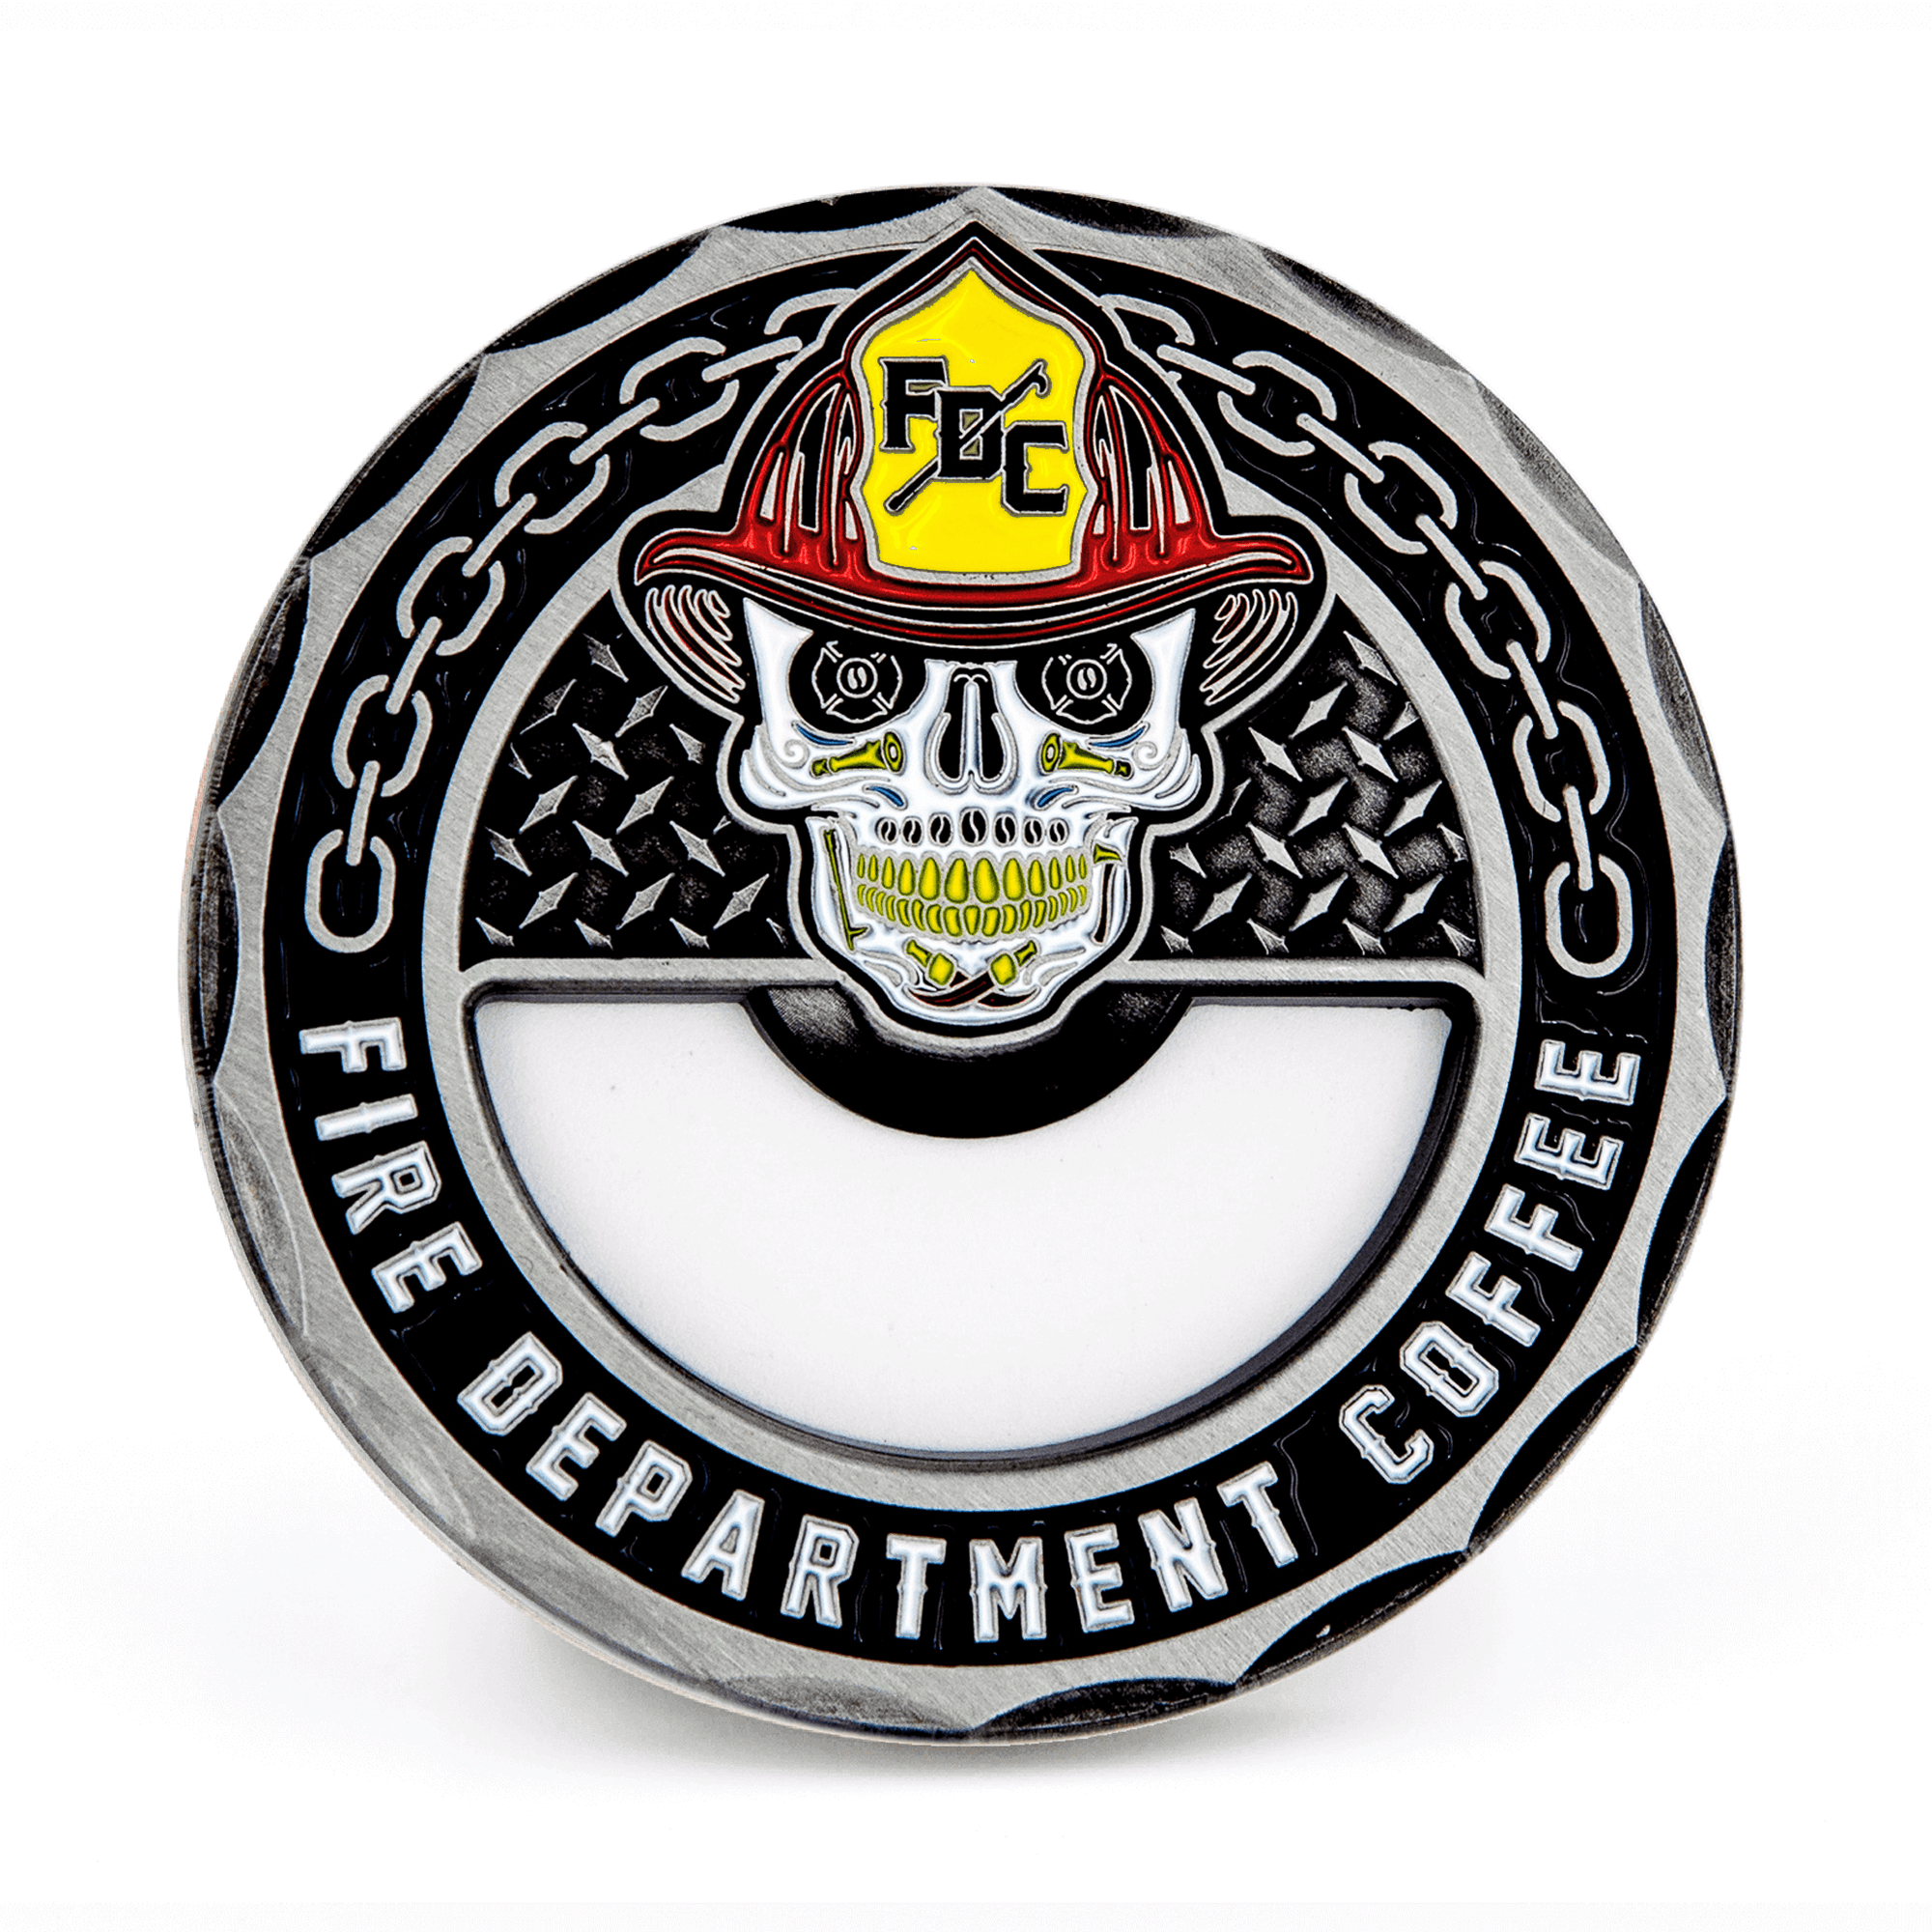 Fire department Coffee's Skull Challenge Coin featuring the Dead Before Coffee logo.